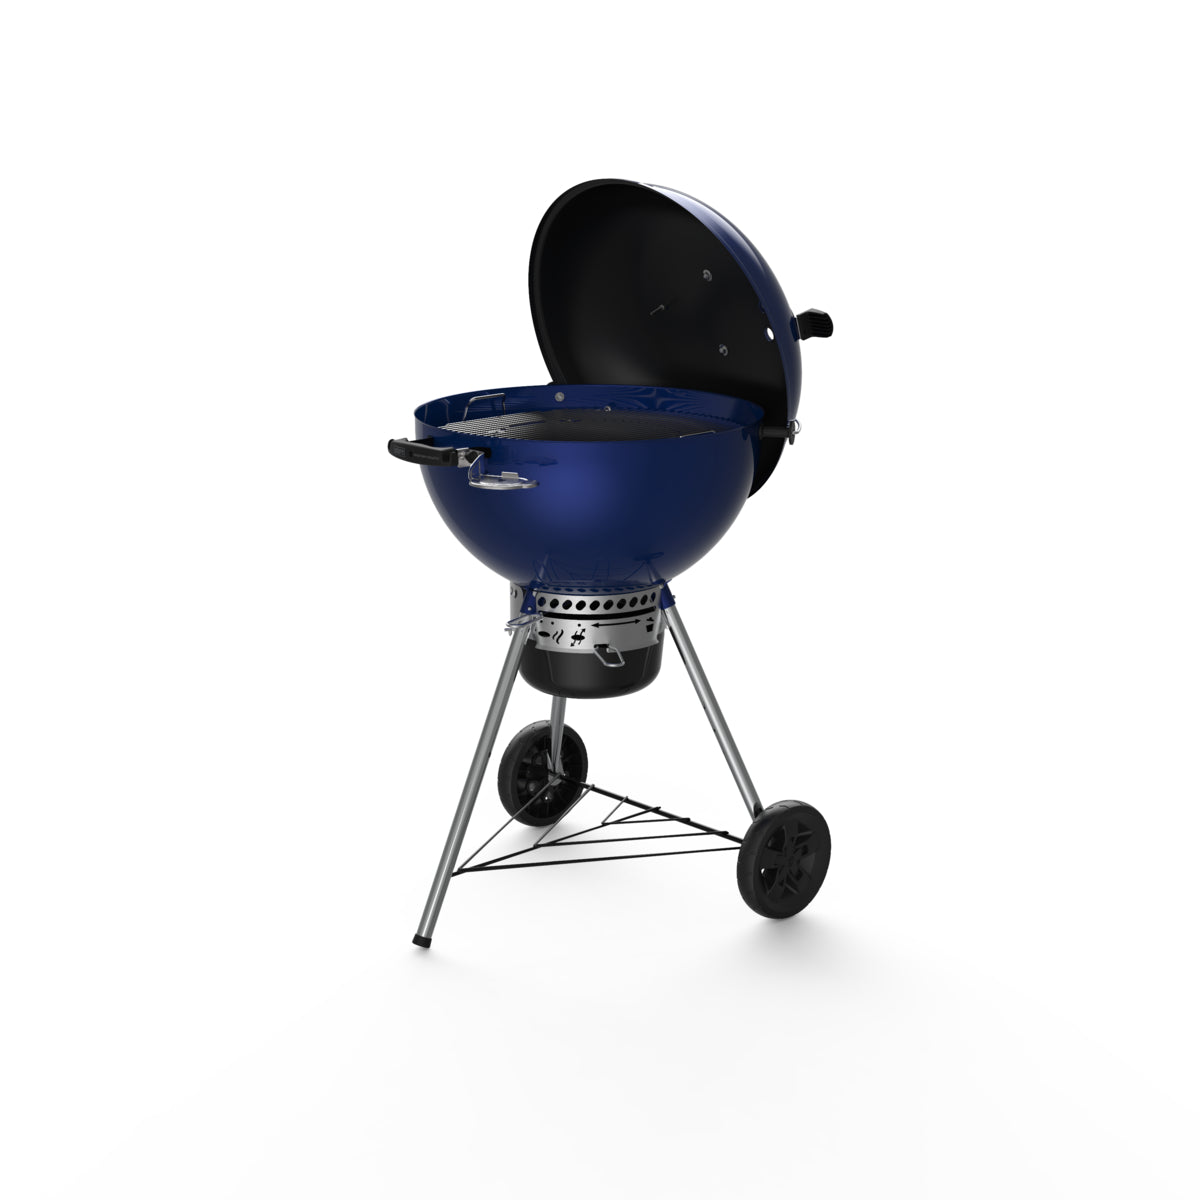 Master-Touch GBS E-5750 Charcoal Barbecue 57 cm - Deep Ocean Blue